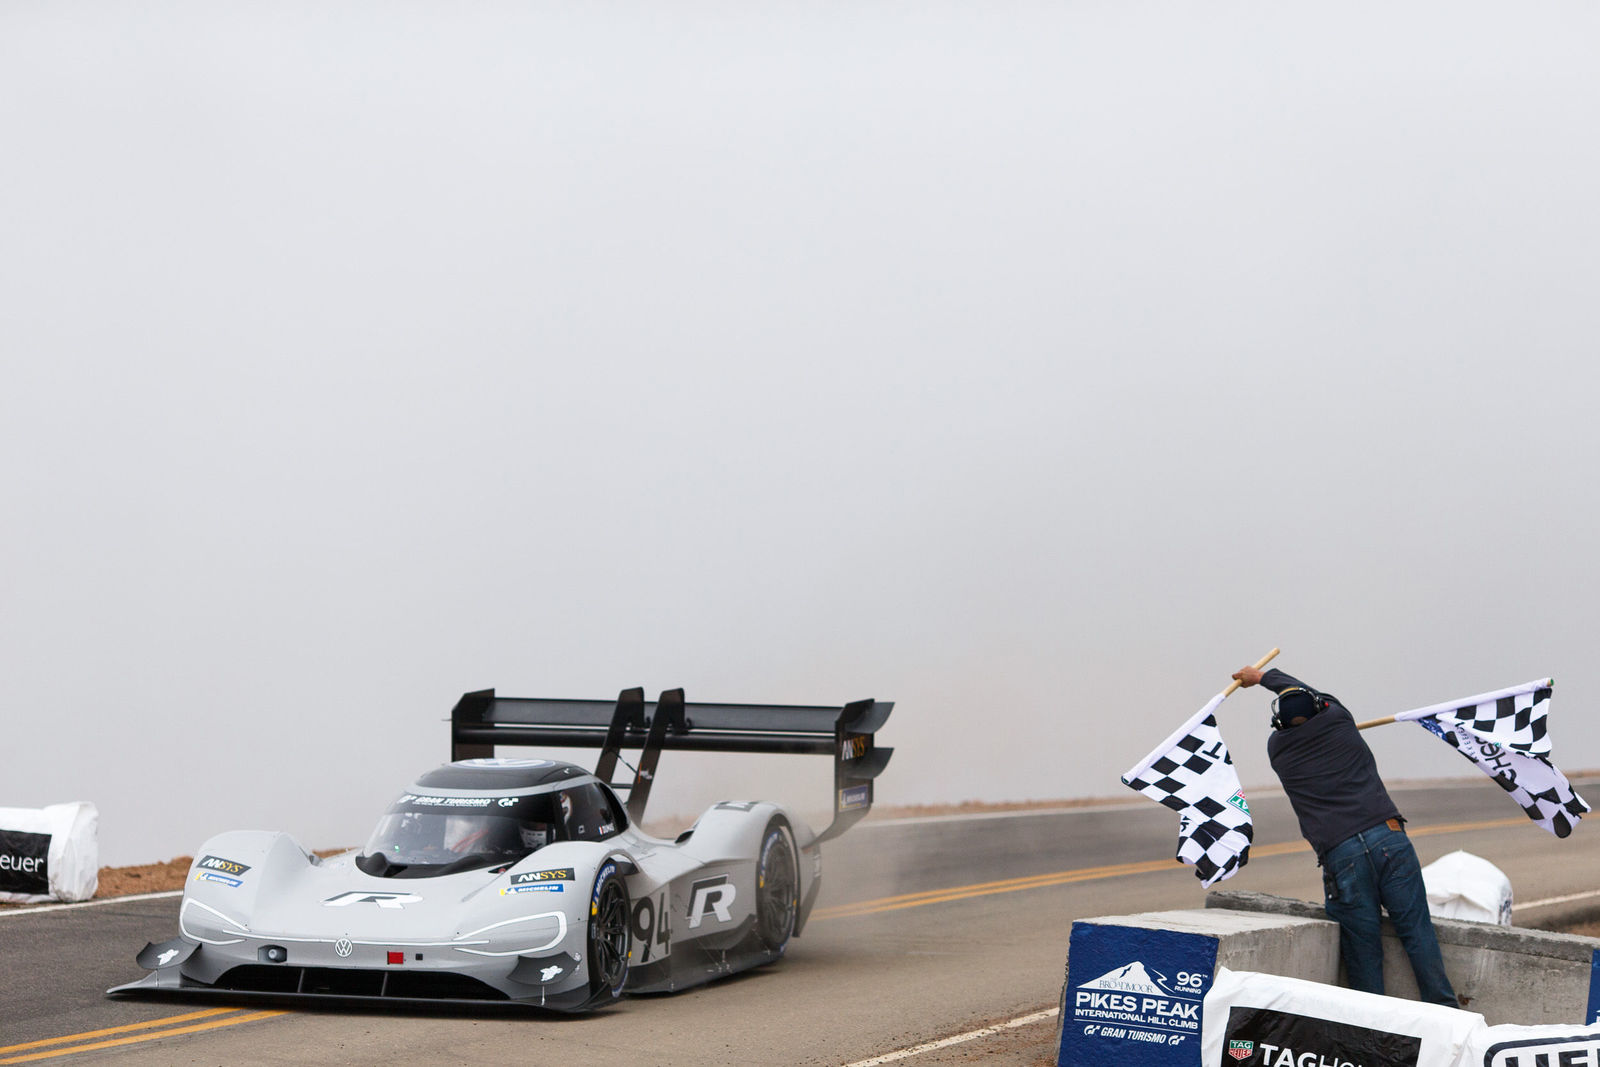 All time record: Volkswagen makes history with the ID. R Pikes Peak